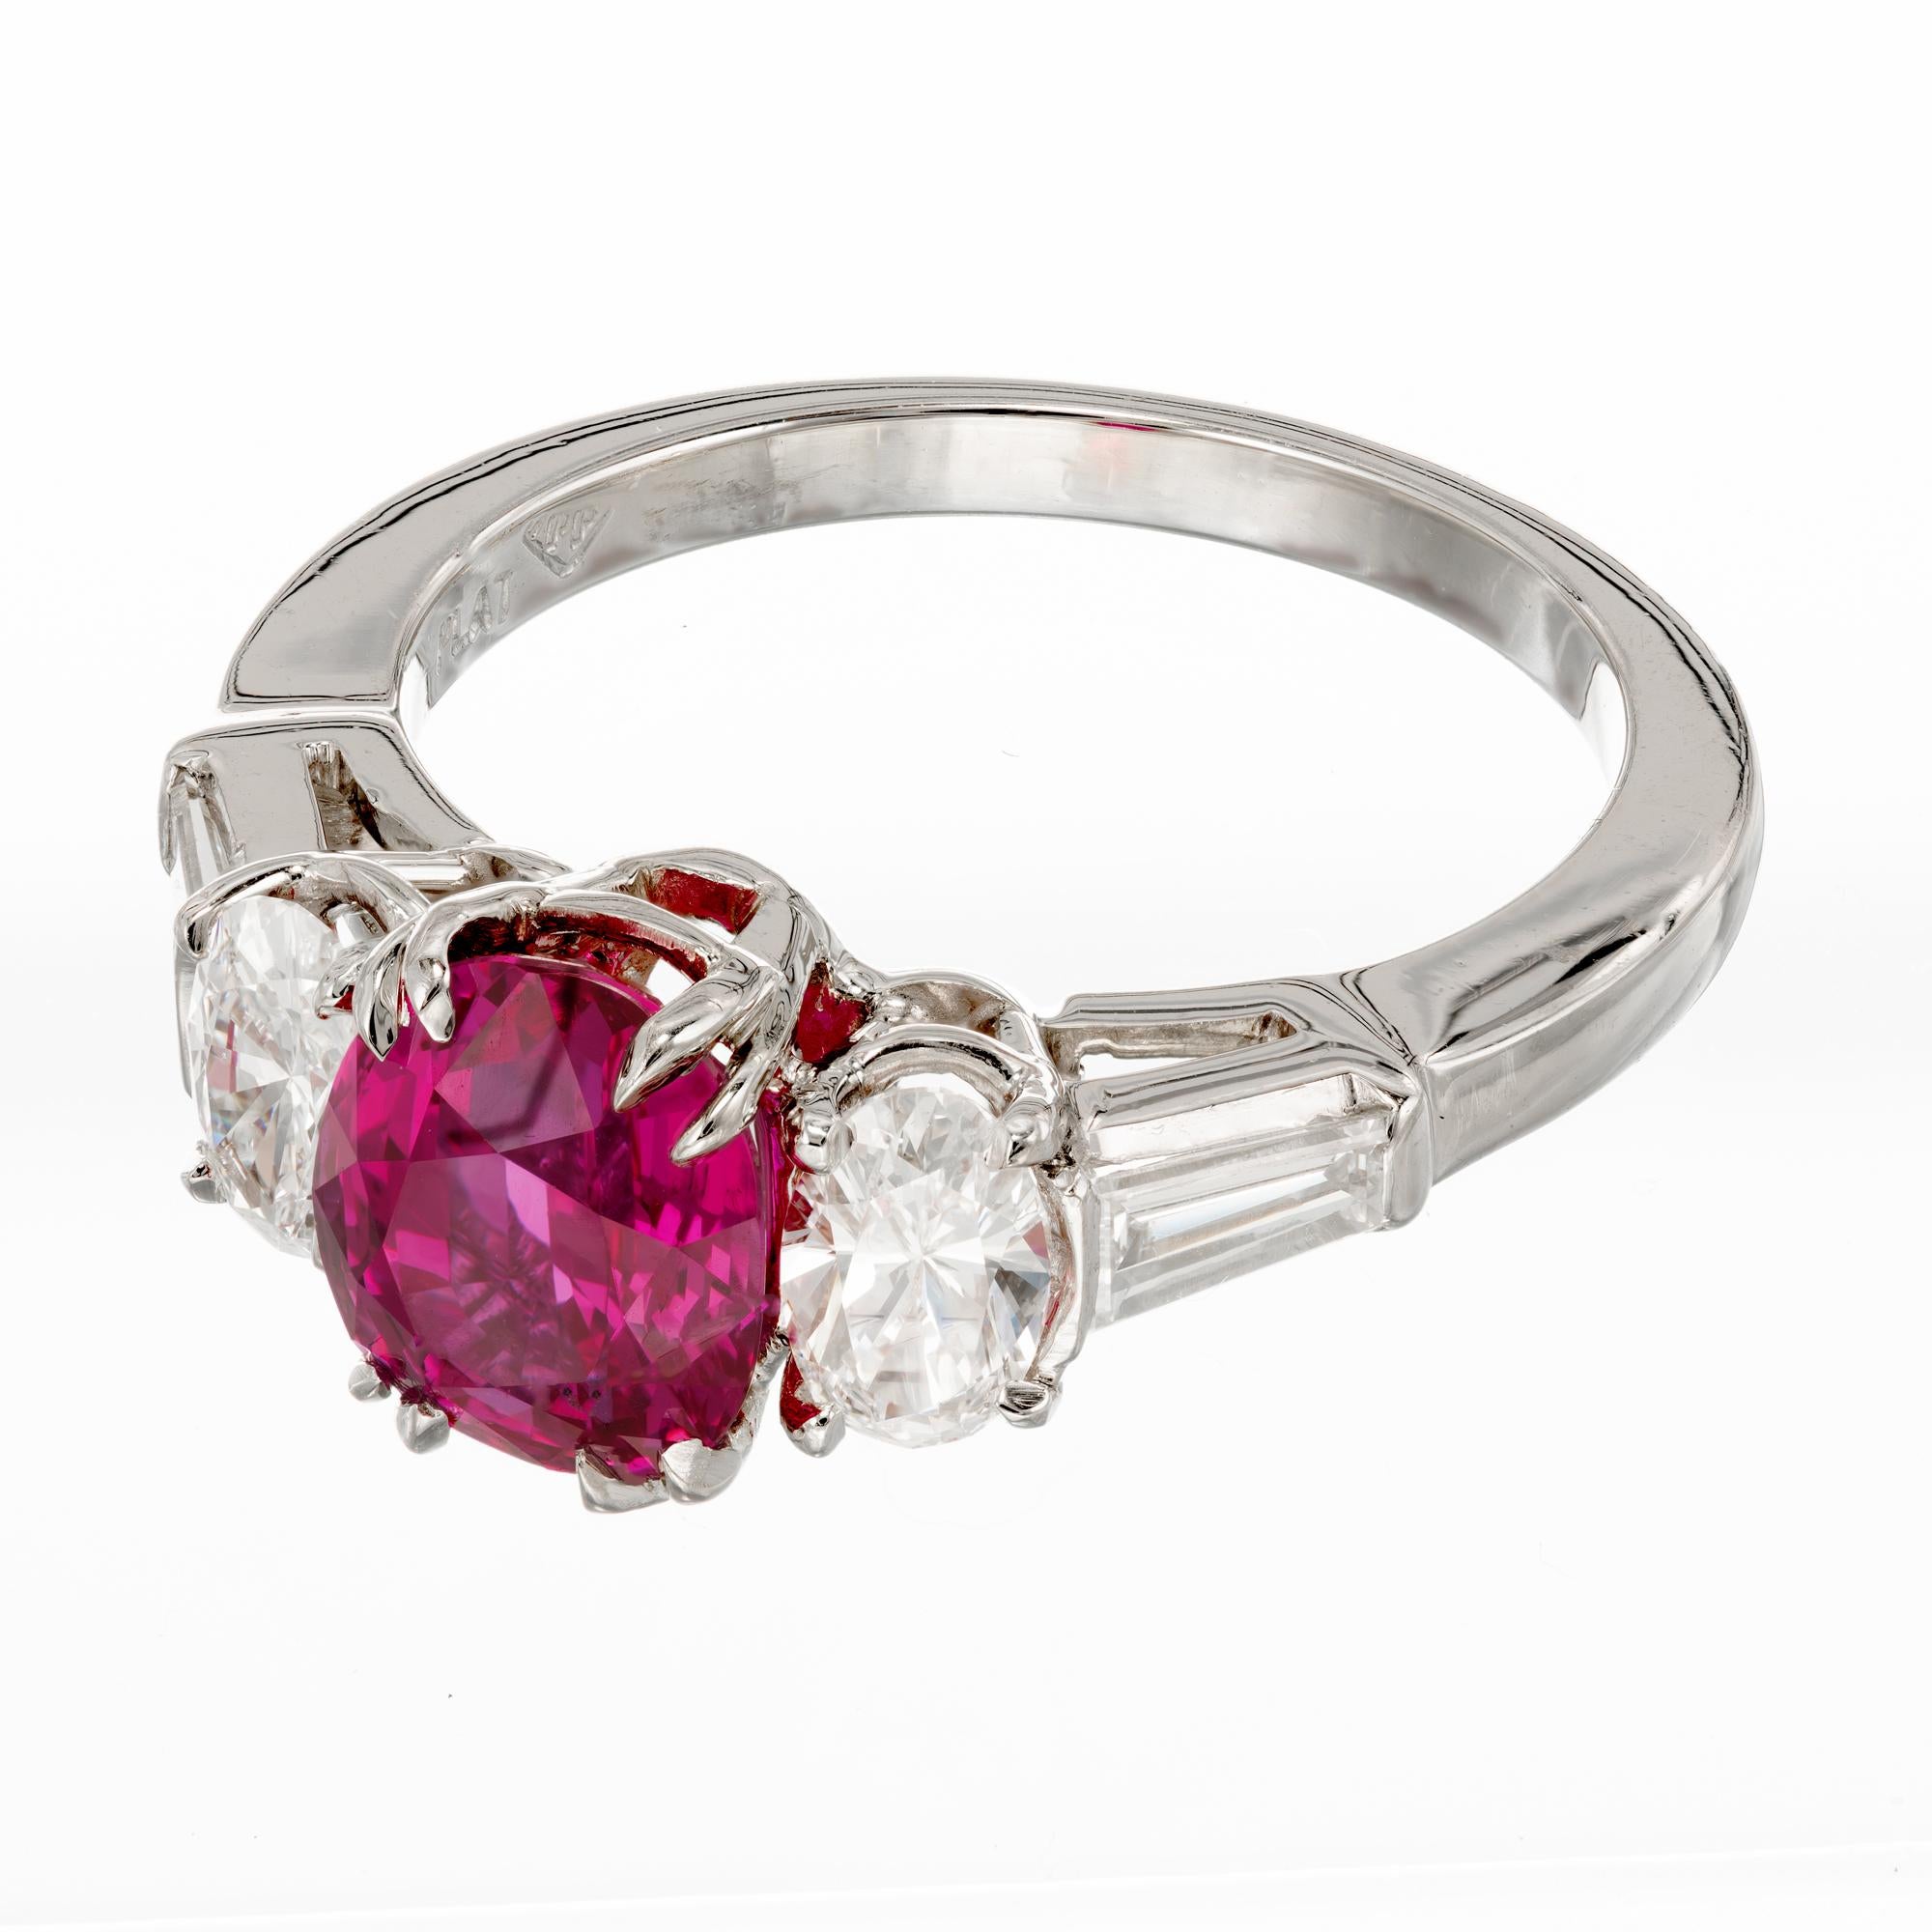 Oval Cut Peter Suchy 2.23 Carat Burma Myanmar Red Ruby Diamond Platinum Engagement Ring For Sale